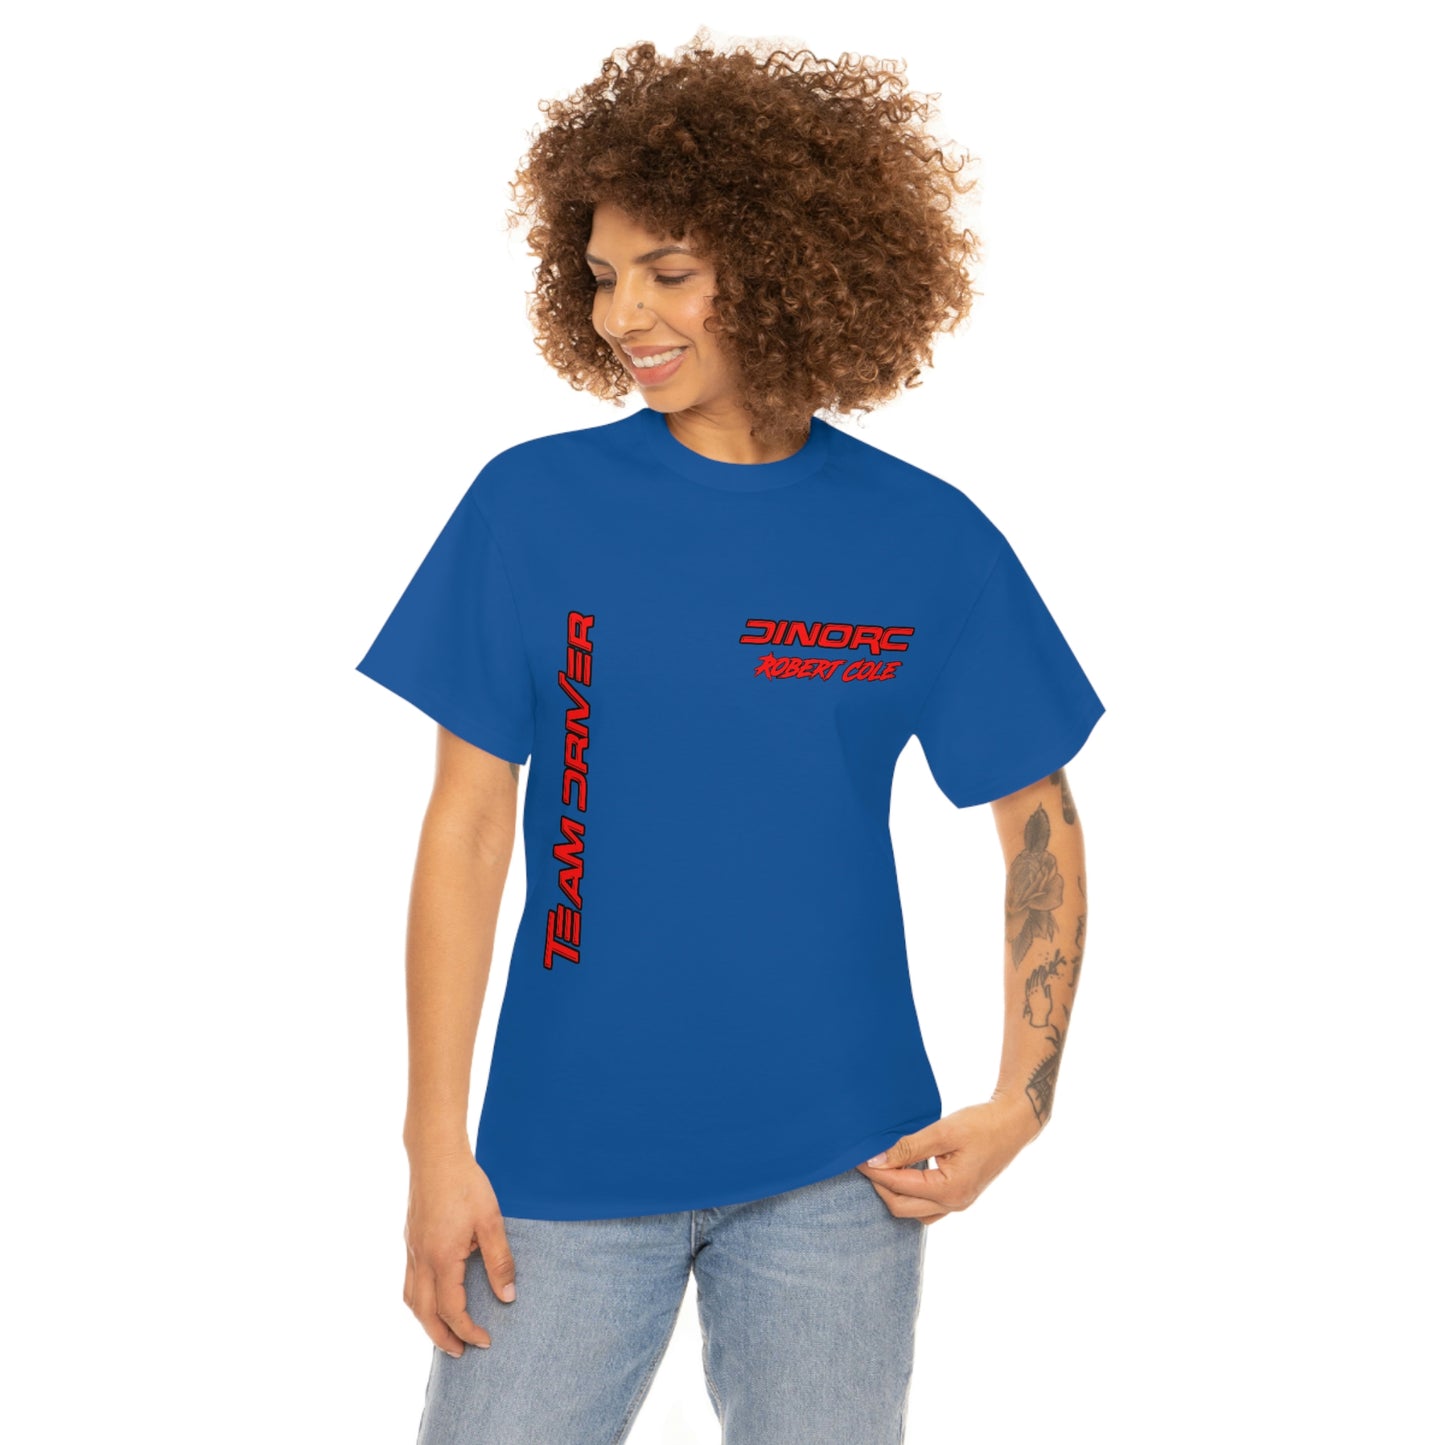 Team Driver Robert Cole Front and Back DinoRc Logo T-Shirt S-5x 5 colors